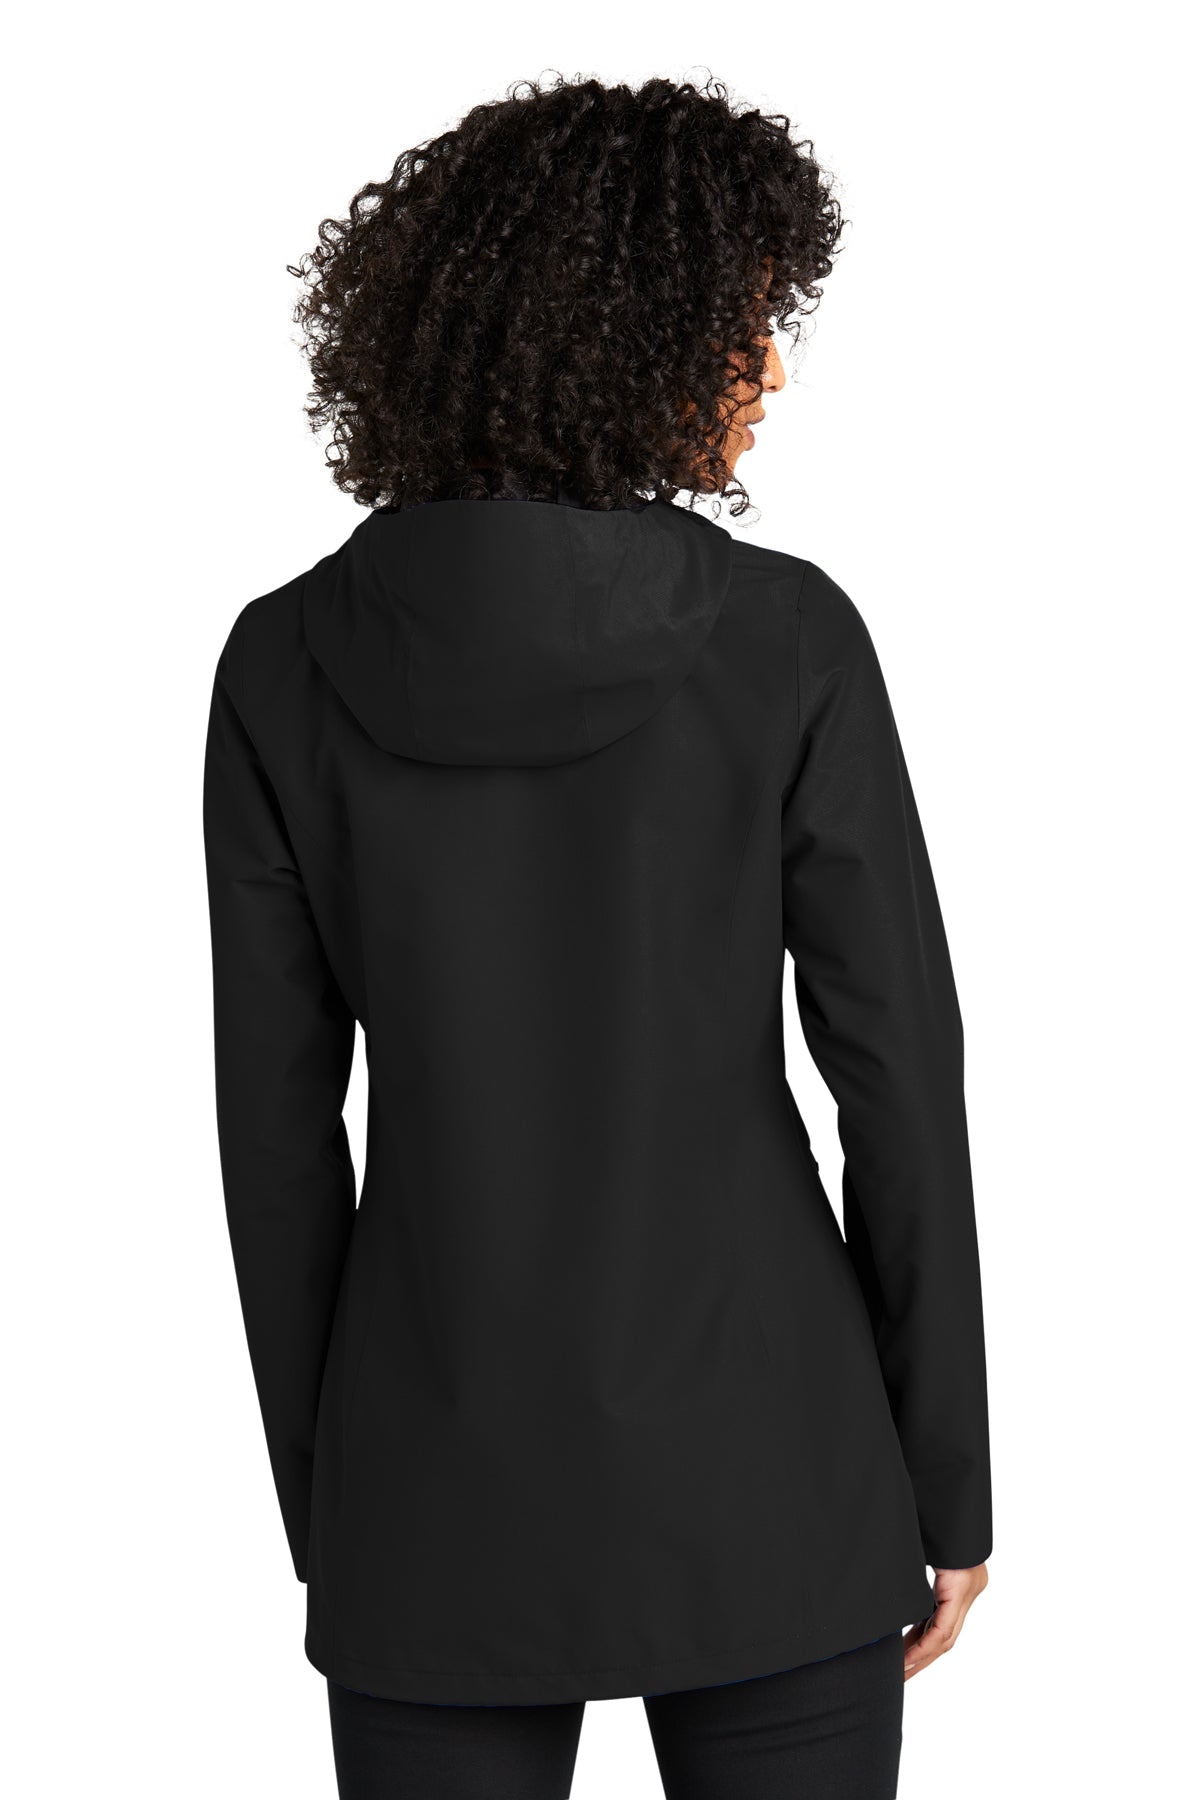 Port Authority Ladies Collective Customized Tech Outer Shell Jackets, Deep Black